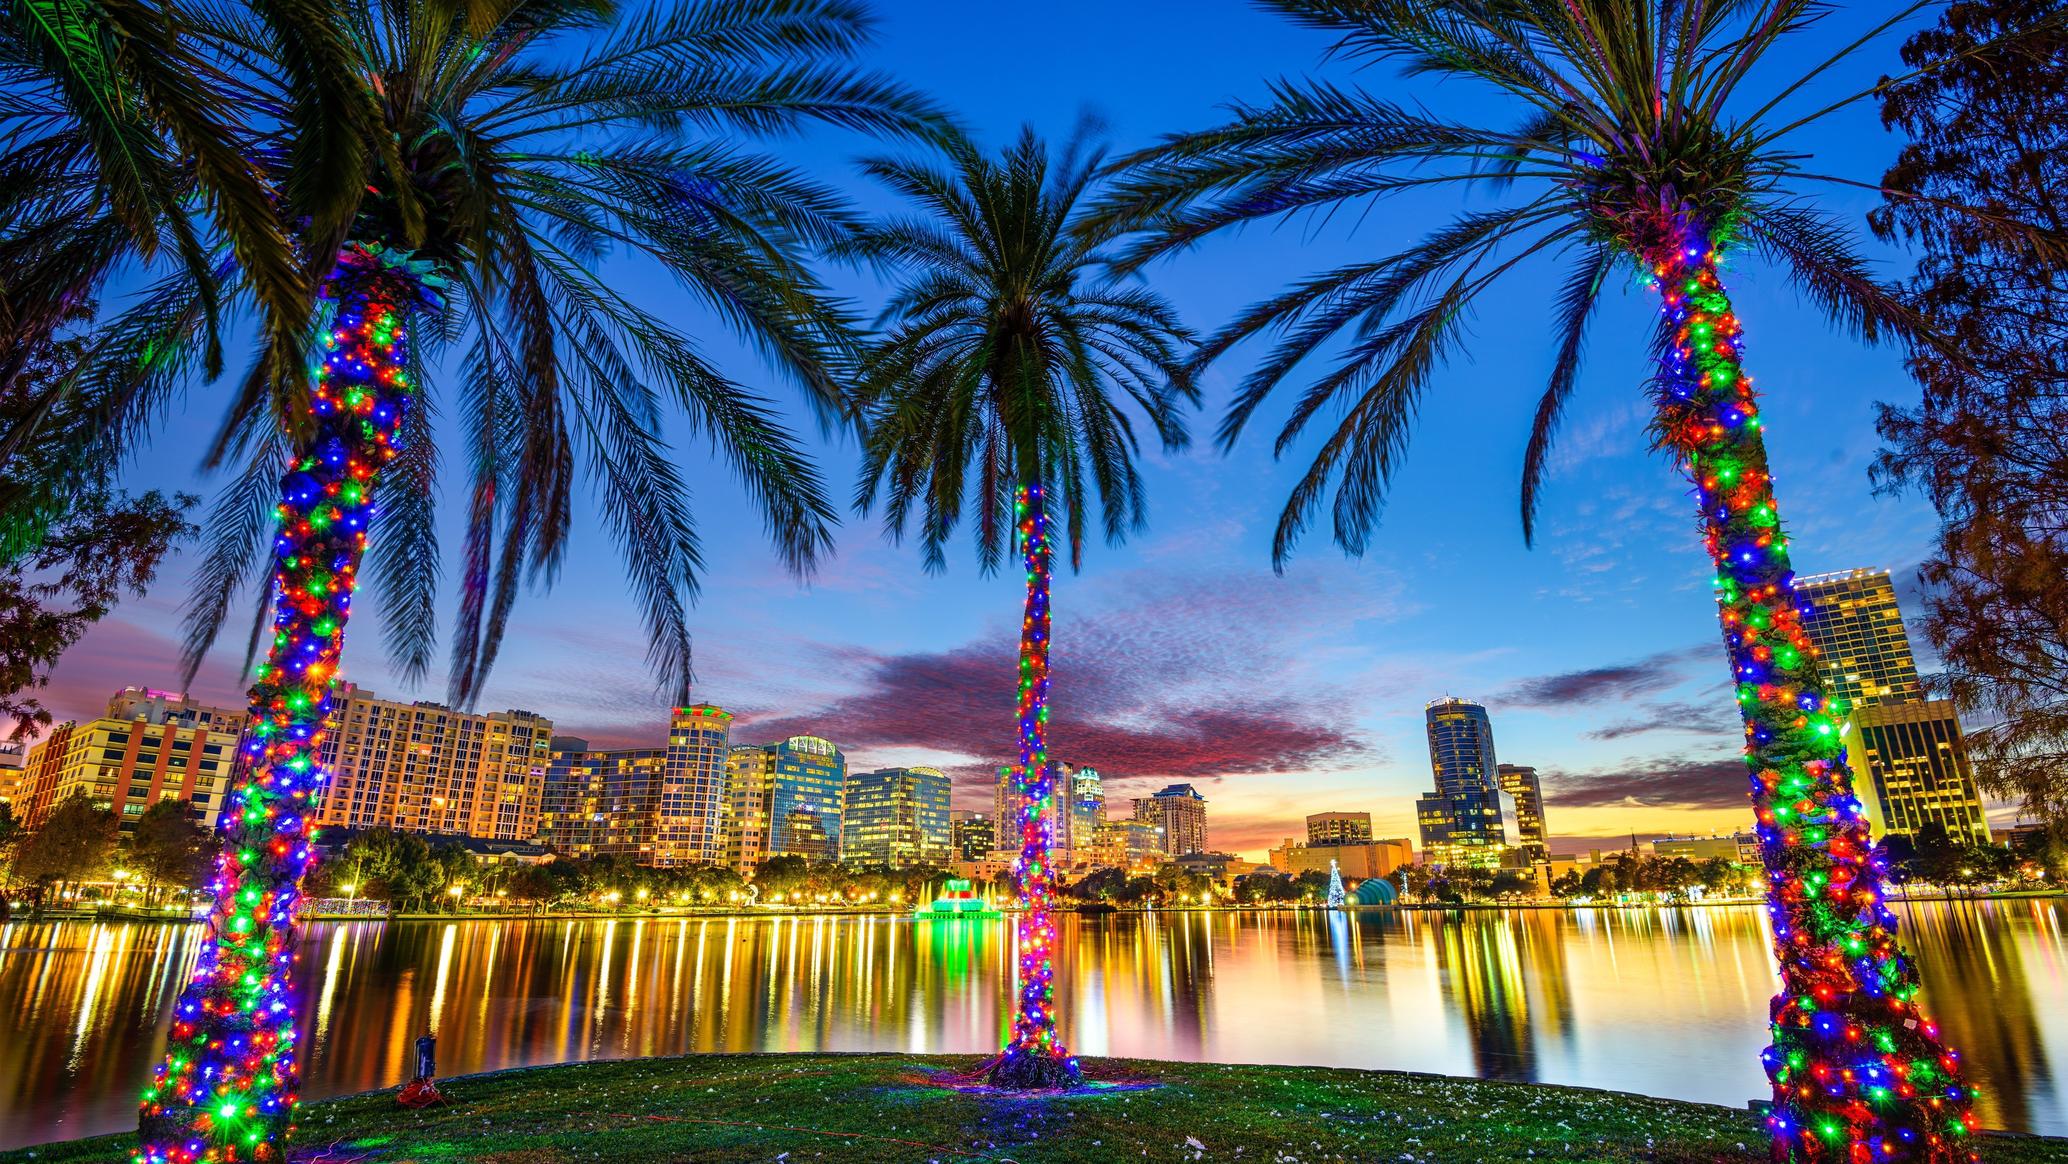 50% discount on flights from Toronto to Orlando with a promo code!